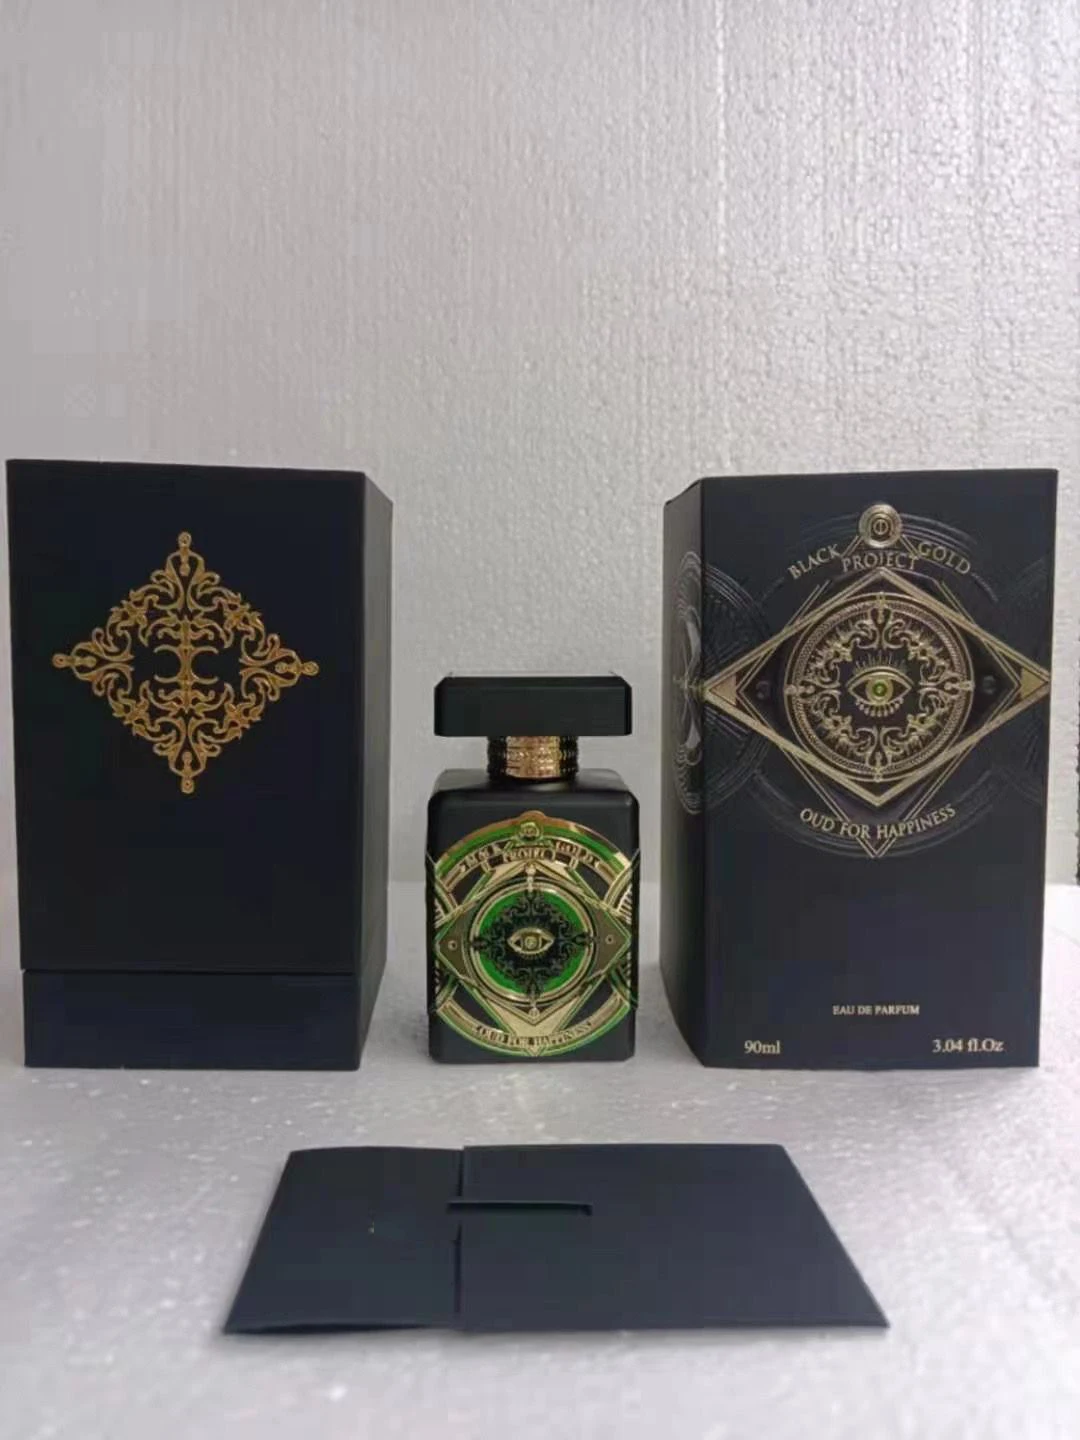 

Prives Oud for Happiness Oud for Greatness Perfumes Luxury Brand Fragrance 90ml Eau De Parfum 3fl.oz Long Lasting Smell EDP Men